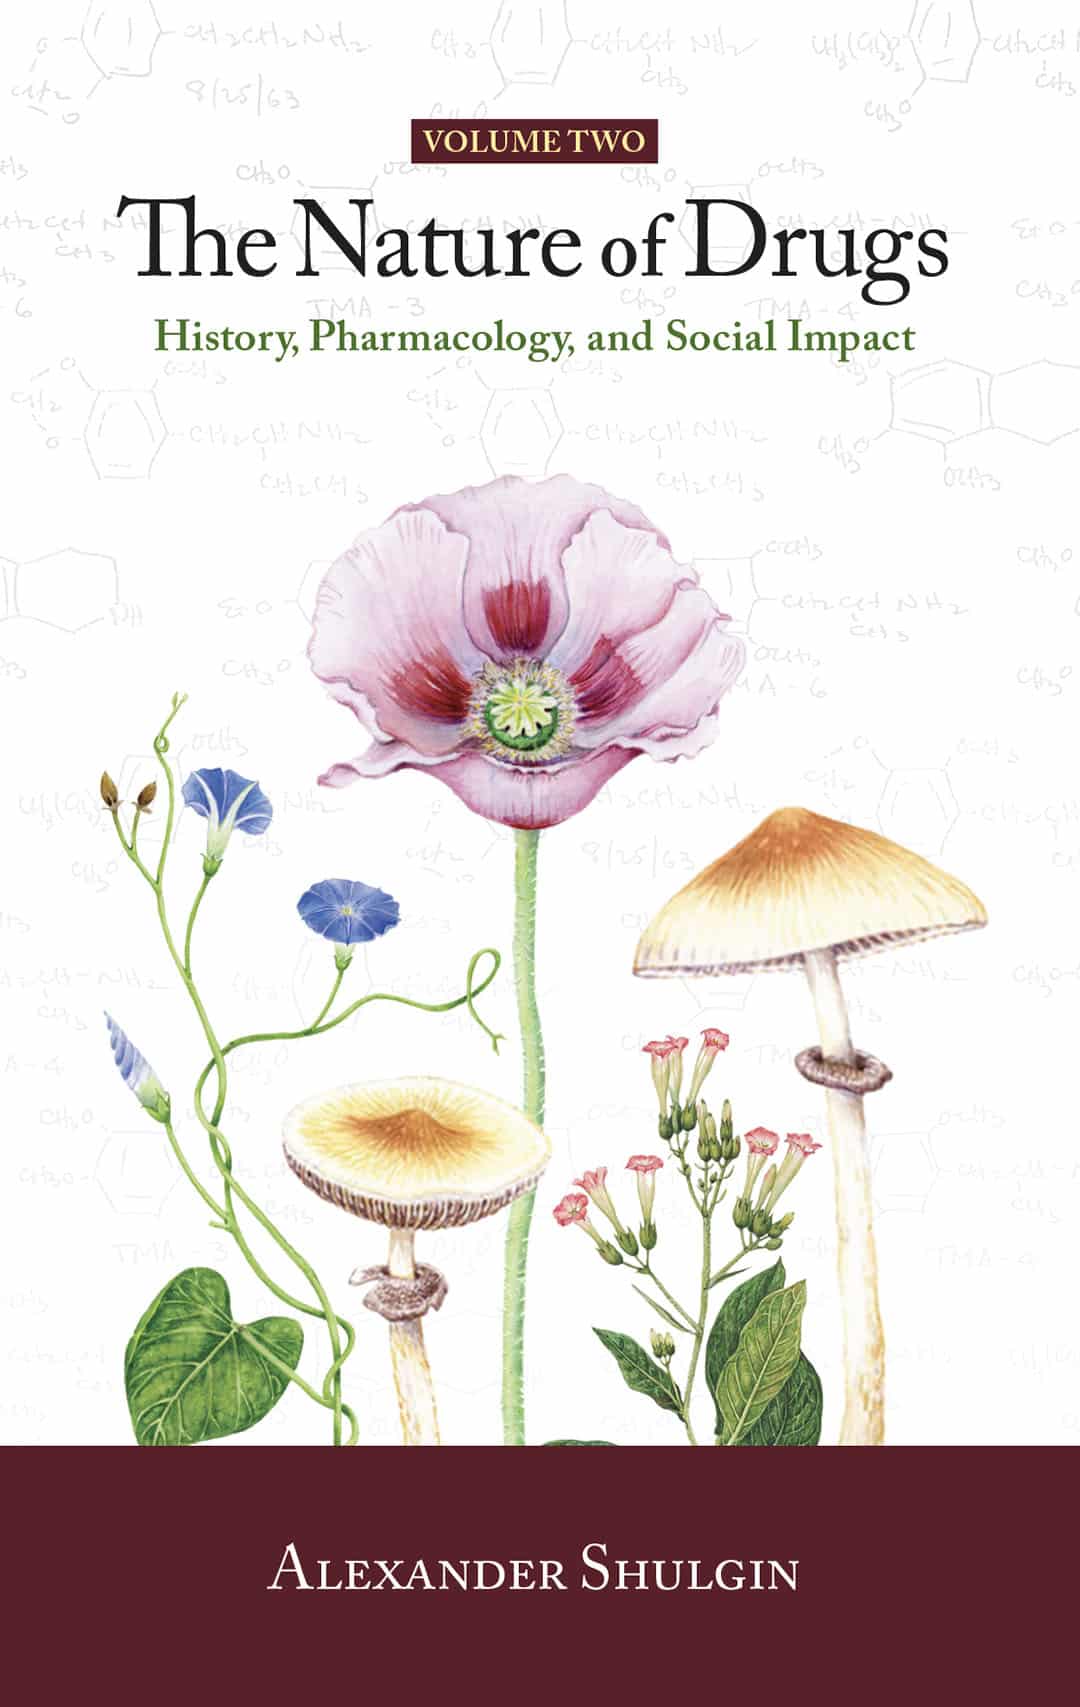 The Nature of Drugs: History, Pharmacology, and Social Impact, Volume 2